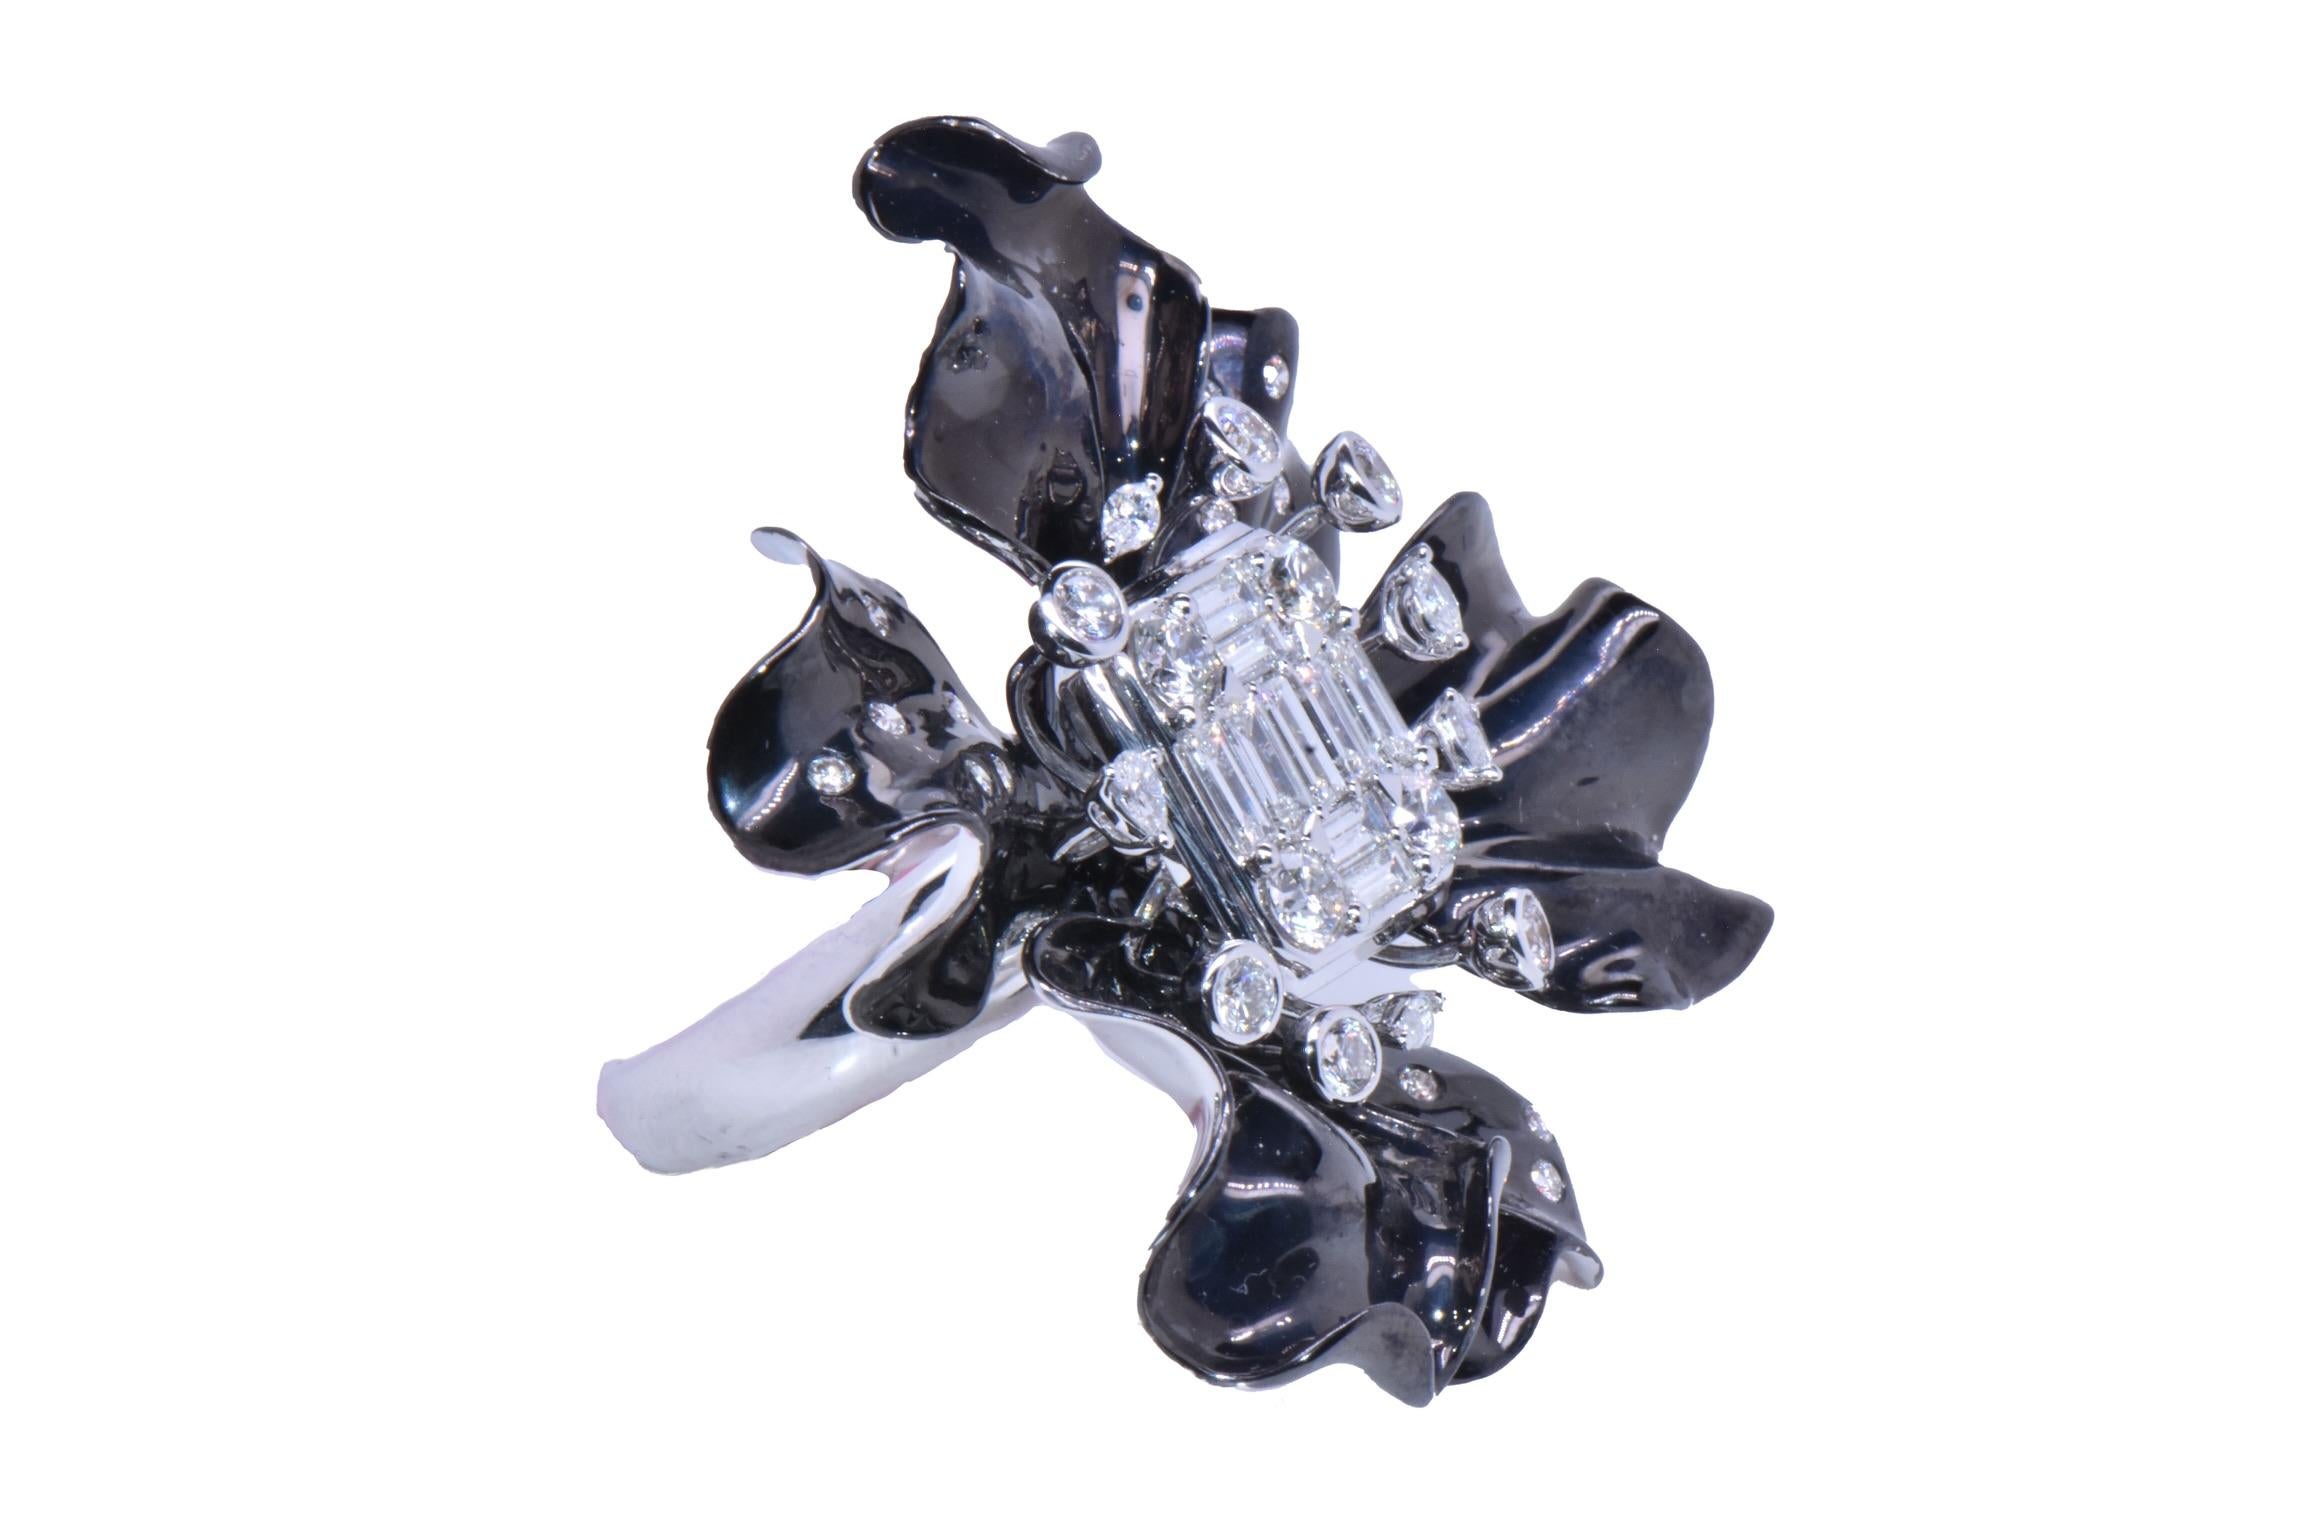 2.57 Carat Black Flower Ring in 18k White Gold 
with a Micro-inlay of diamonds on every other petal, 3D Pollen stems with Round, Marquise, and Pear Shaped Diamonds surrounding a Large Baguette Center with For Round Diamonds on the Corners 
Total